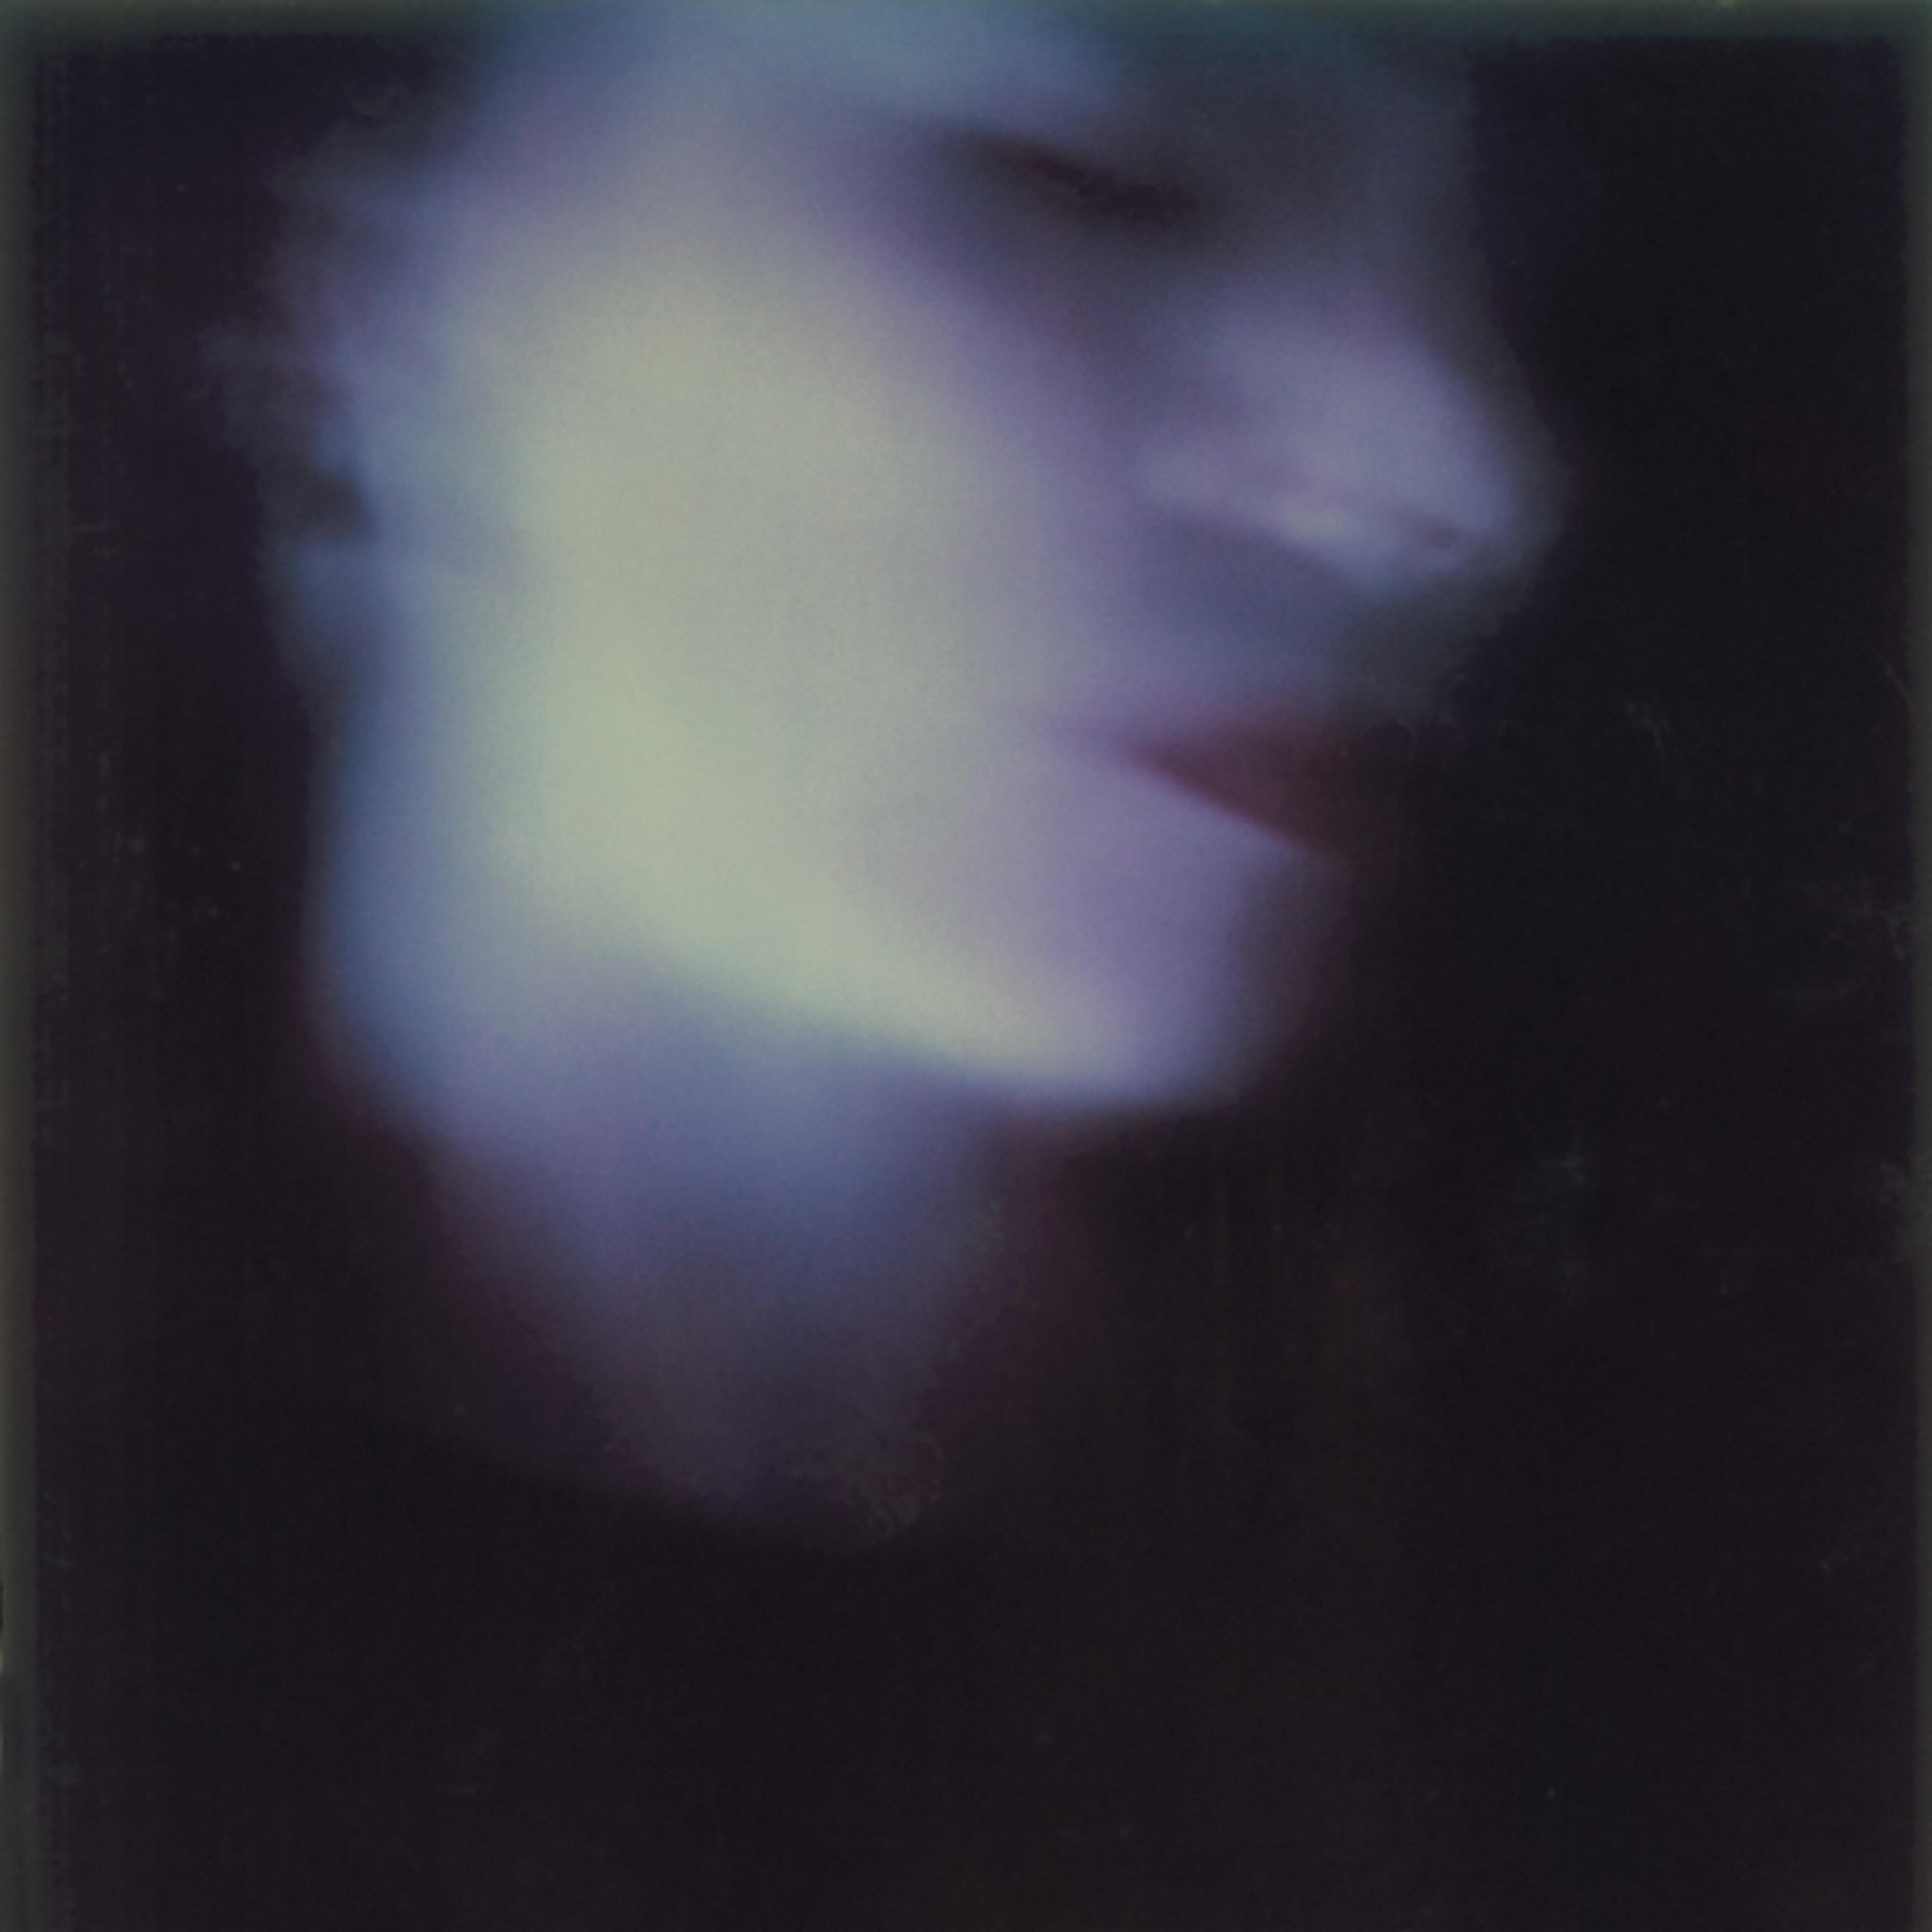 Janet Bayly, Self Portrait /Blue Face (detail), 1979/2002, four colour Lambda prints from SX-70 Polaroids. Courtesy of the artist in Fragments of a World, curated by Sandy Callister, Adam Art Gallery Te Pātaka Toi, Victoria University of Wellington (photo: Shaun Waugh)